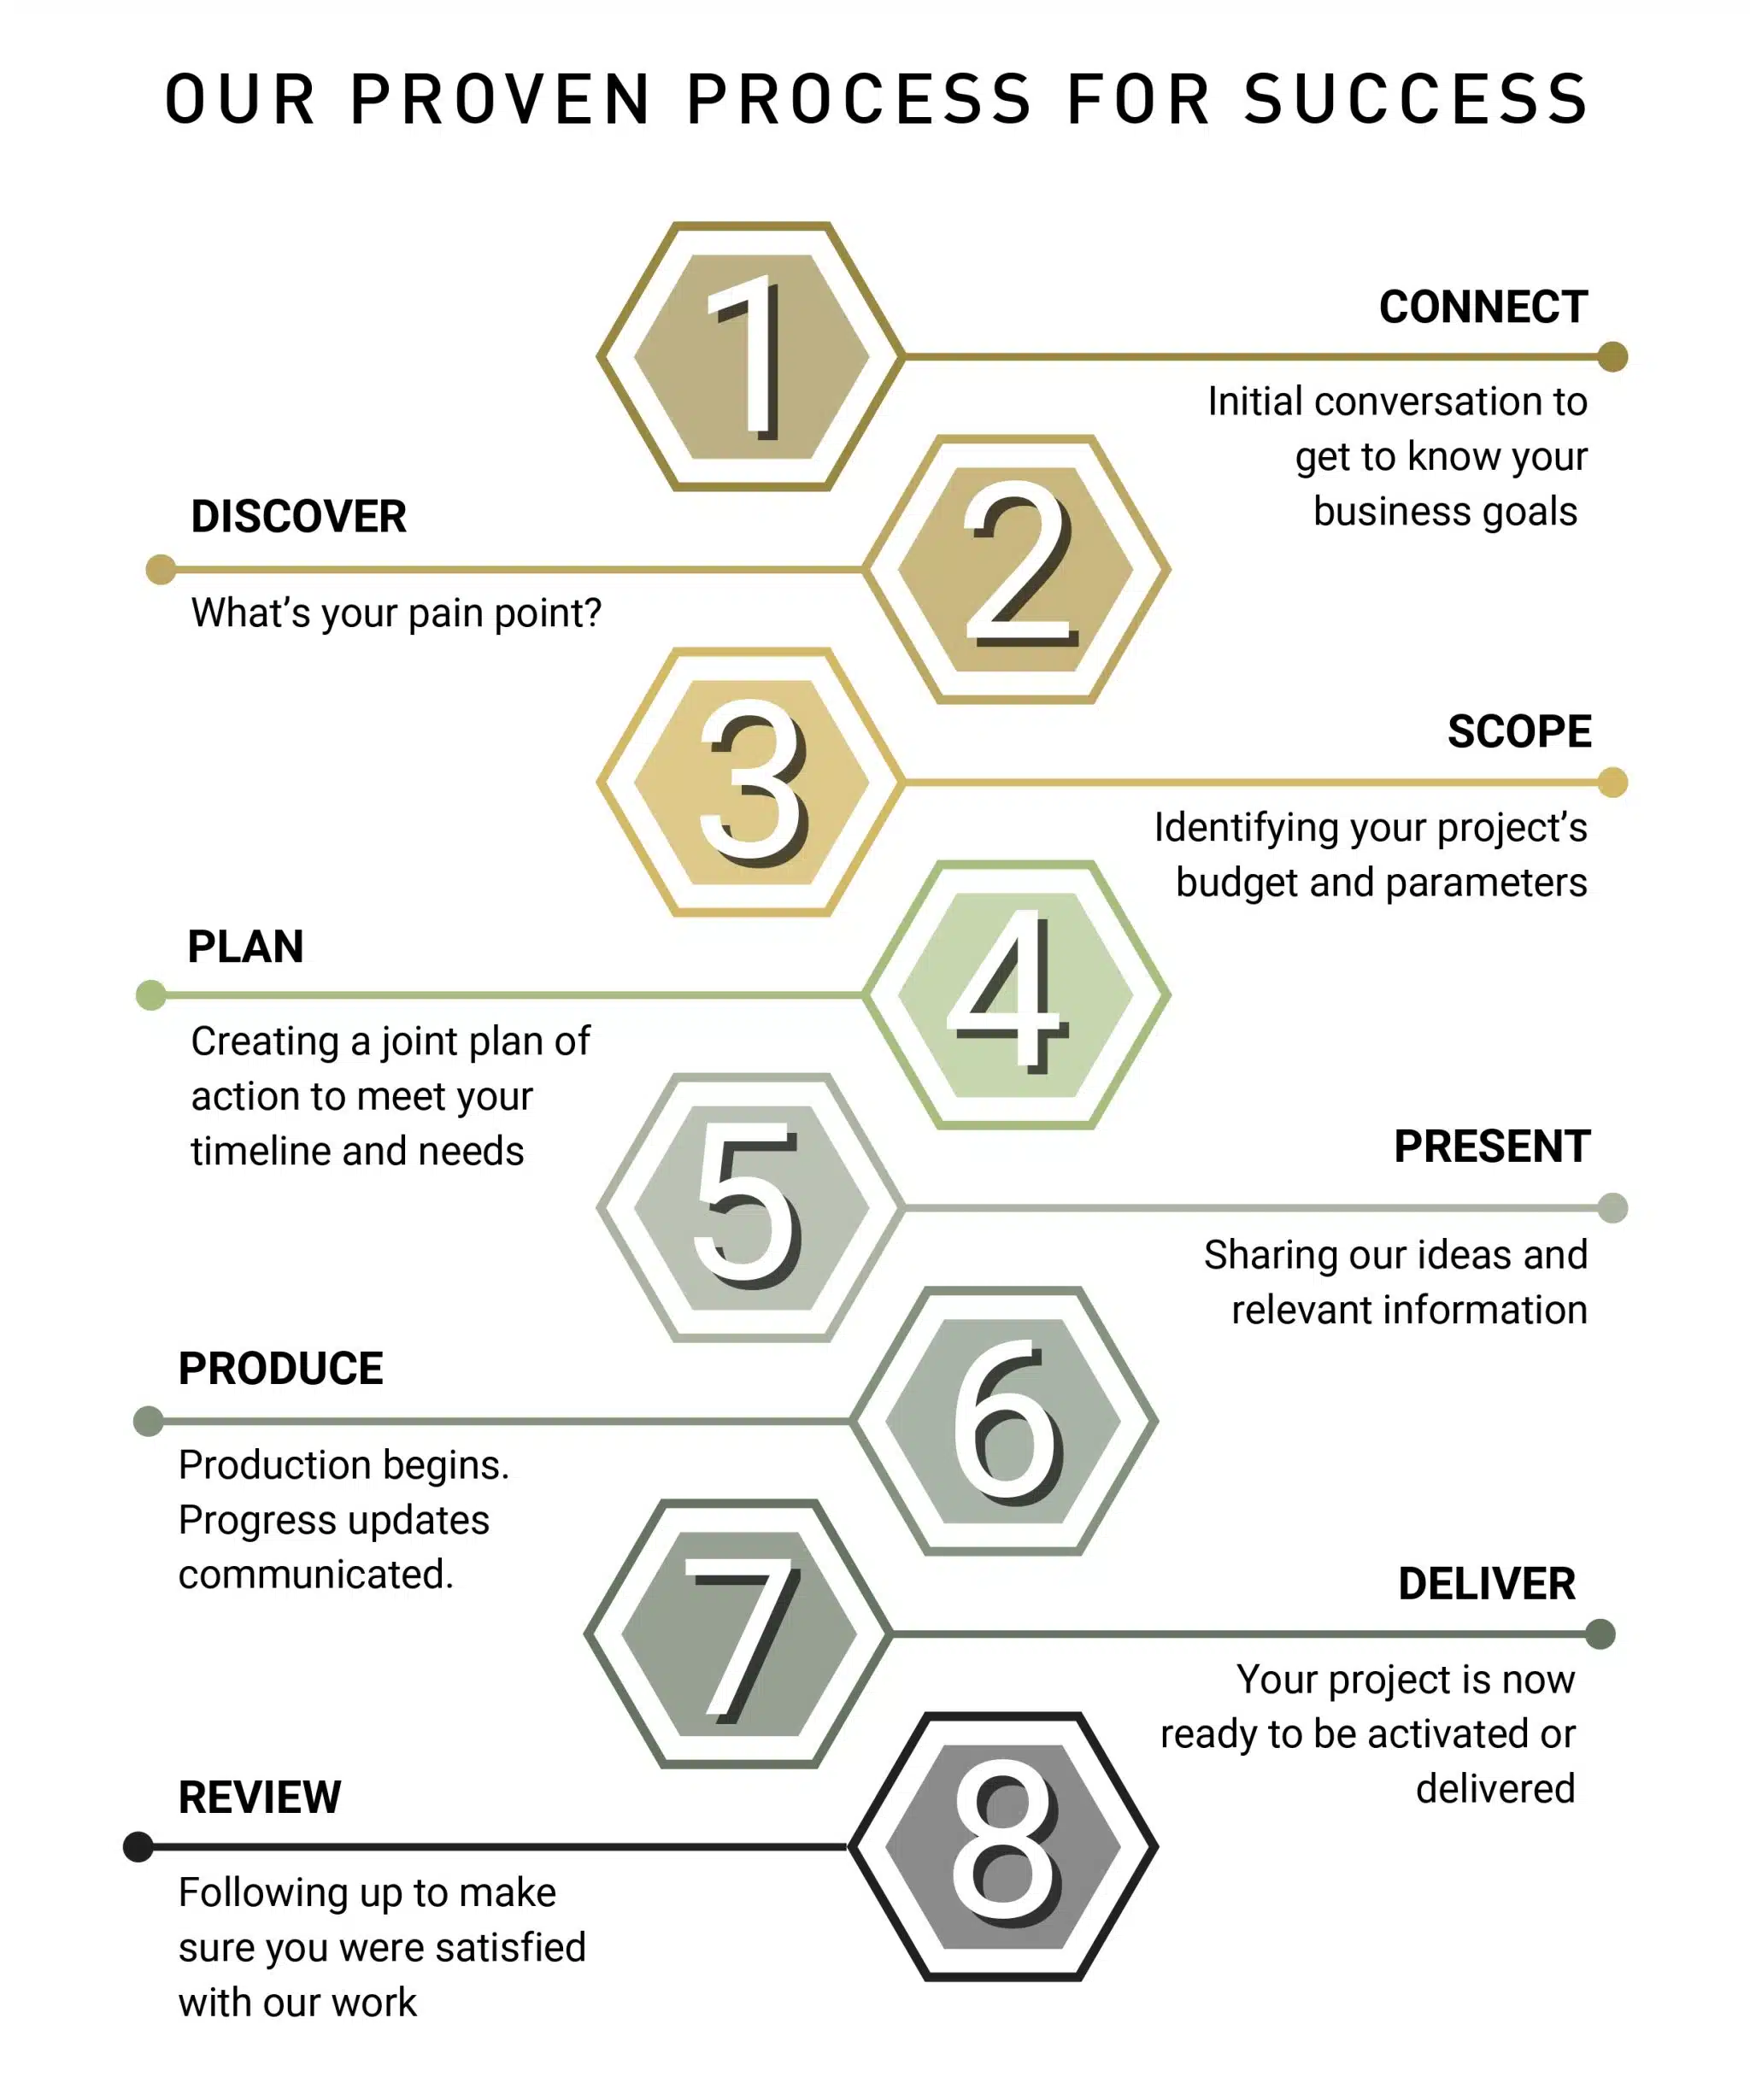 Our Proven Process for Success. Understanding how Honeycomb Promotional Marketing Agency operates so you can be successful